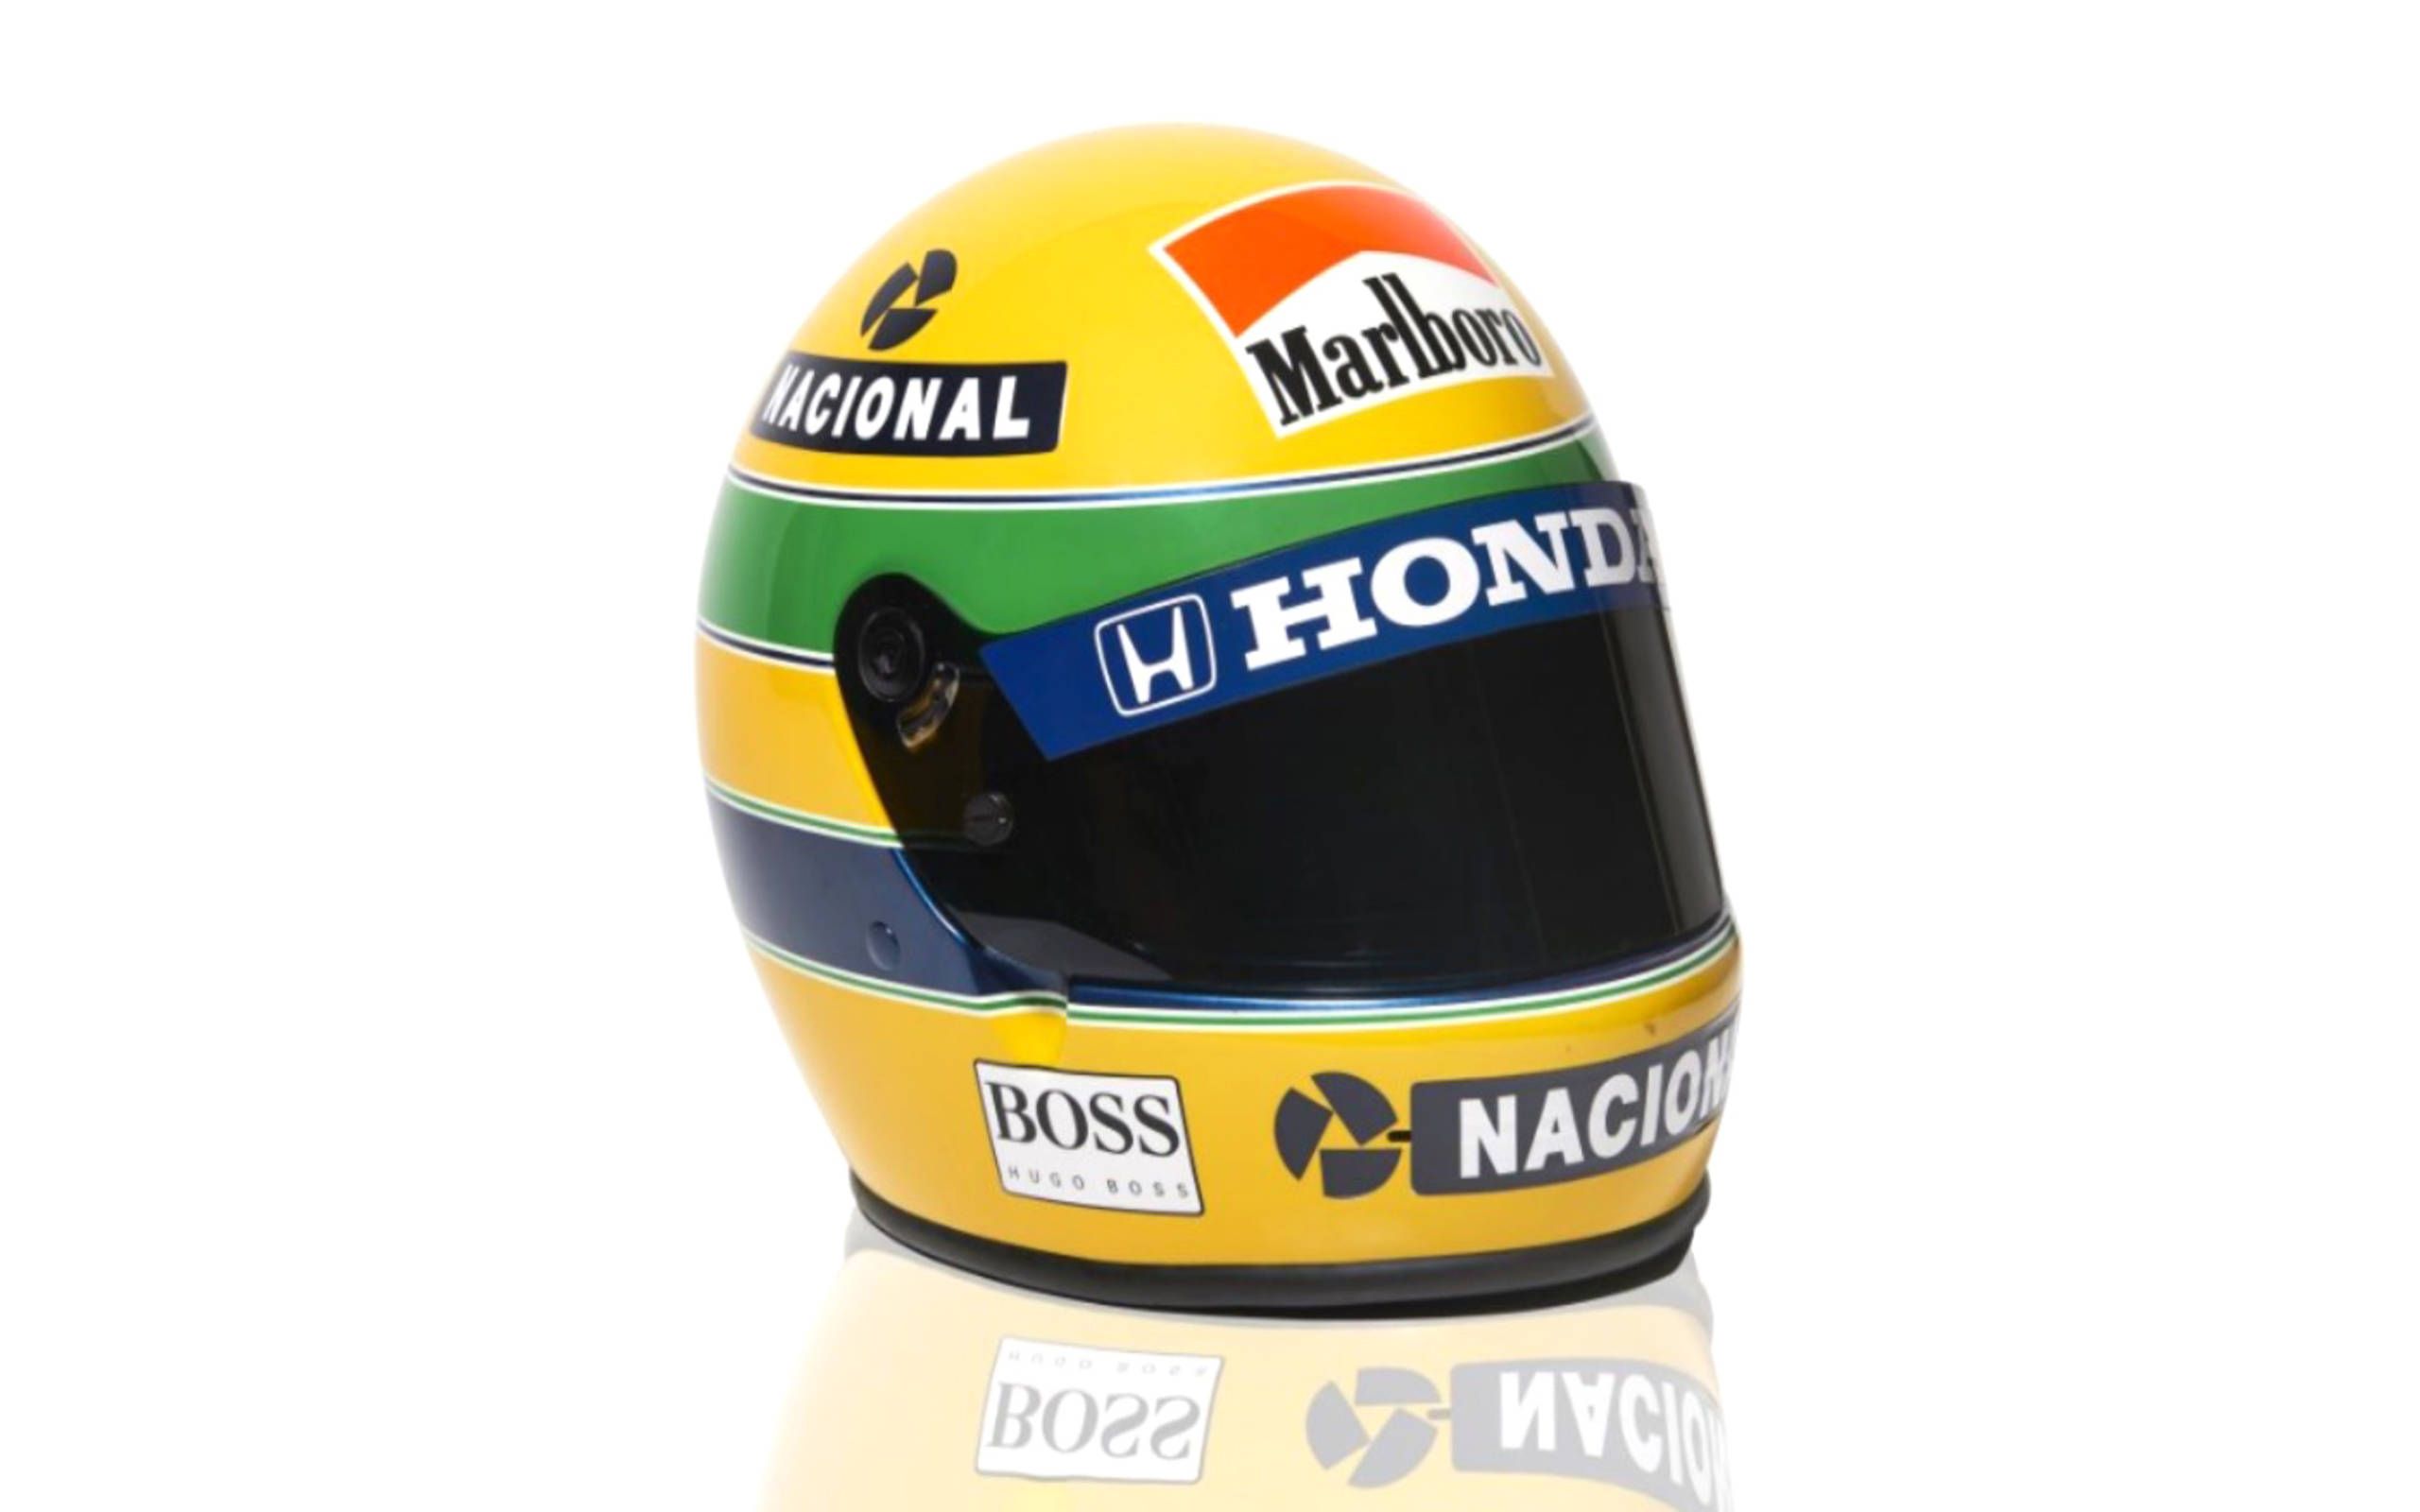 Ayrton Senna also an avid and his helmet is up for auction